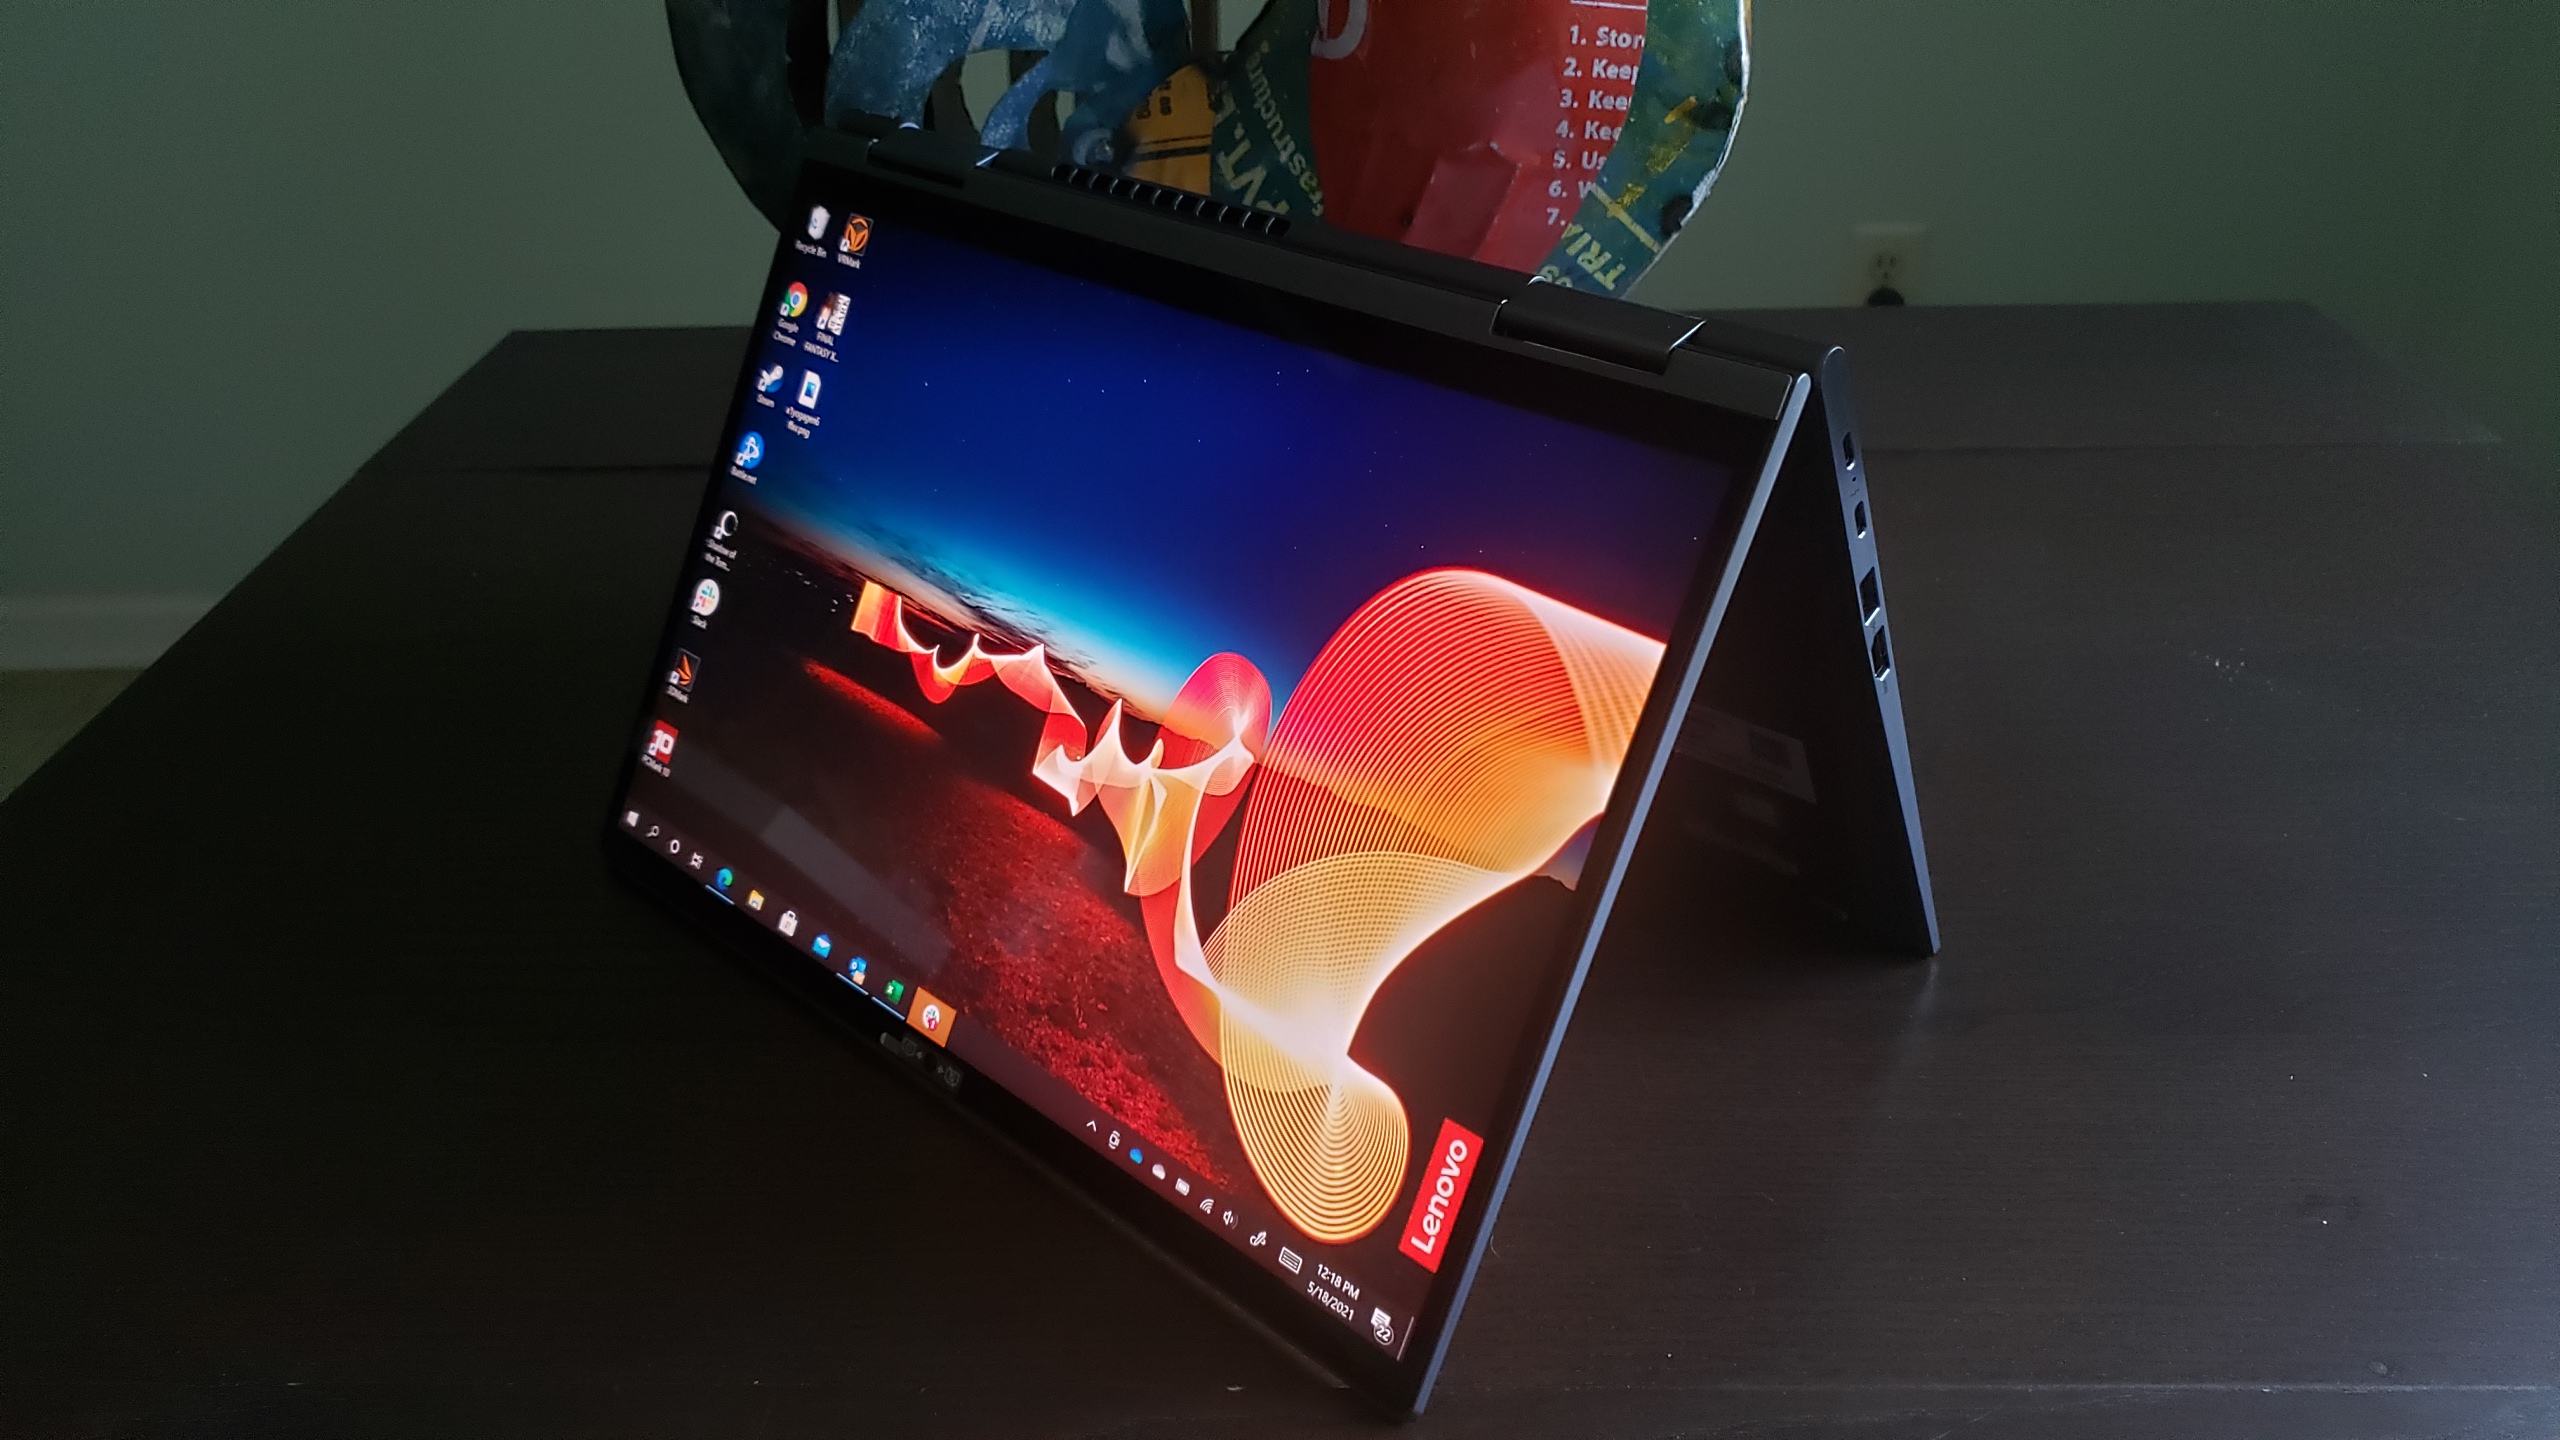 Lenovo ThinkPad X1 Yoga Gen 8 Review: Business 2-in-1 With Right